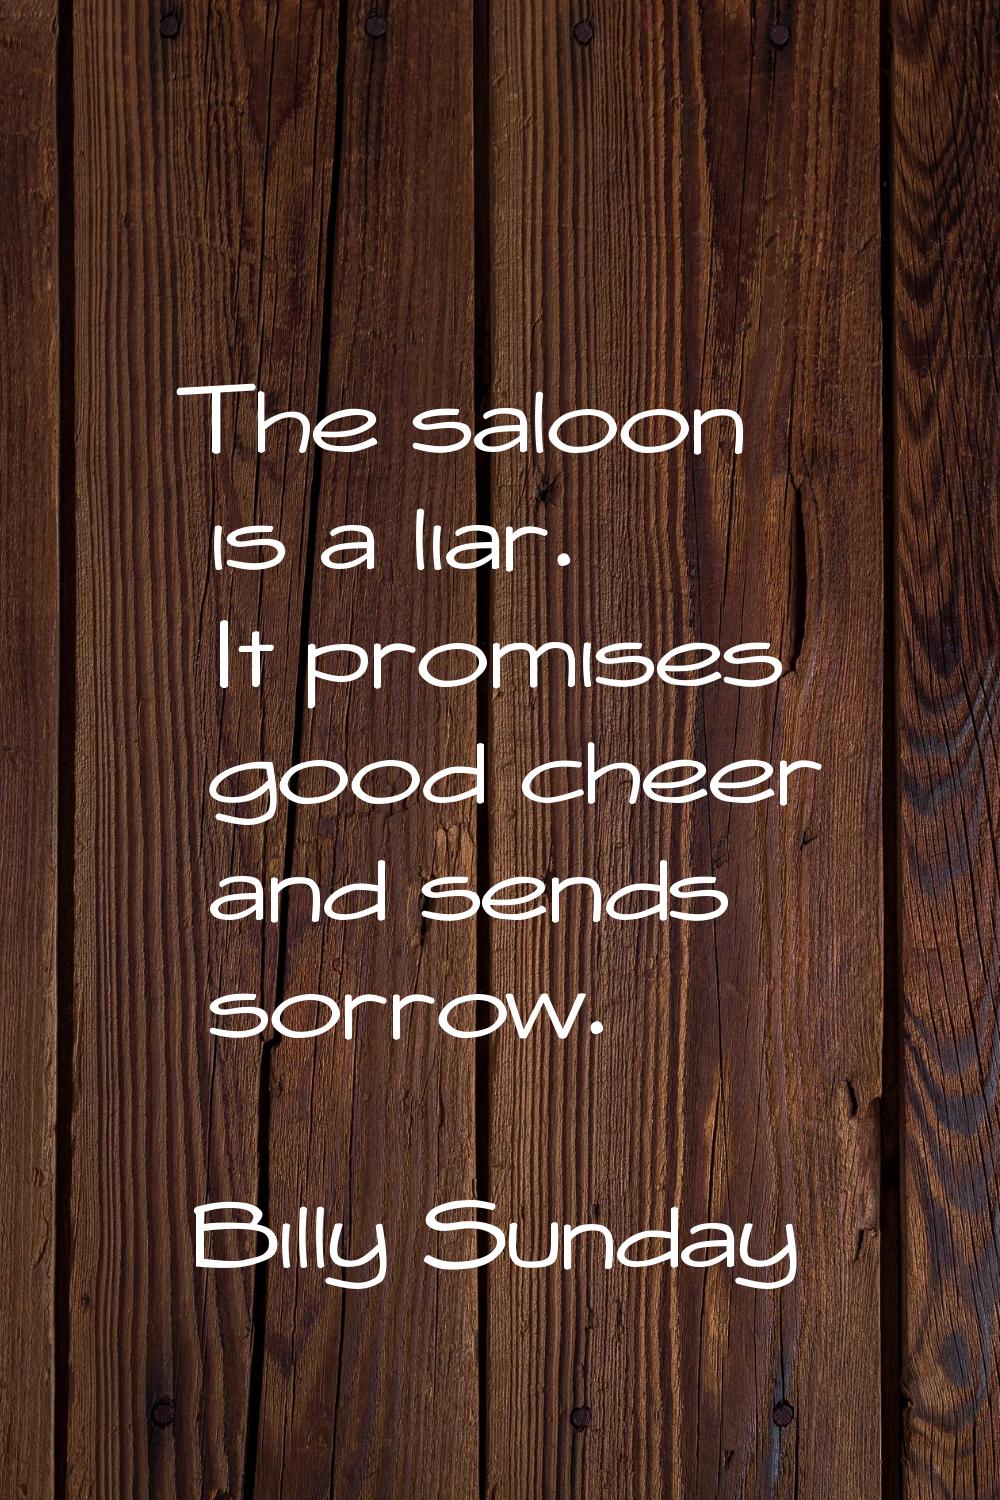 The saloon is a liar. It promises good cheer and sends sorrow.